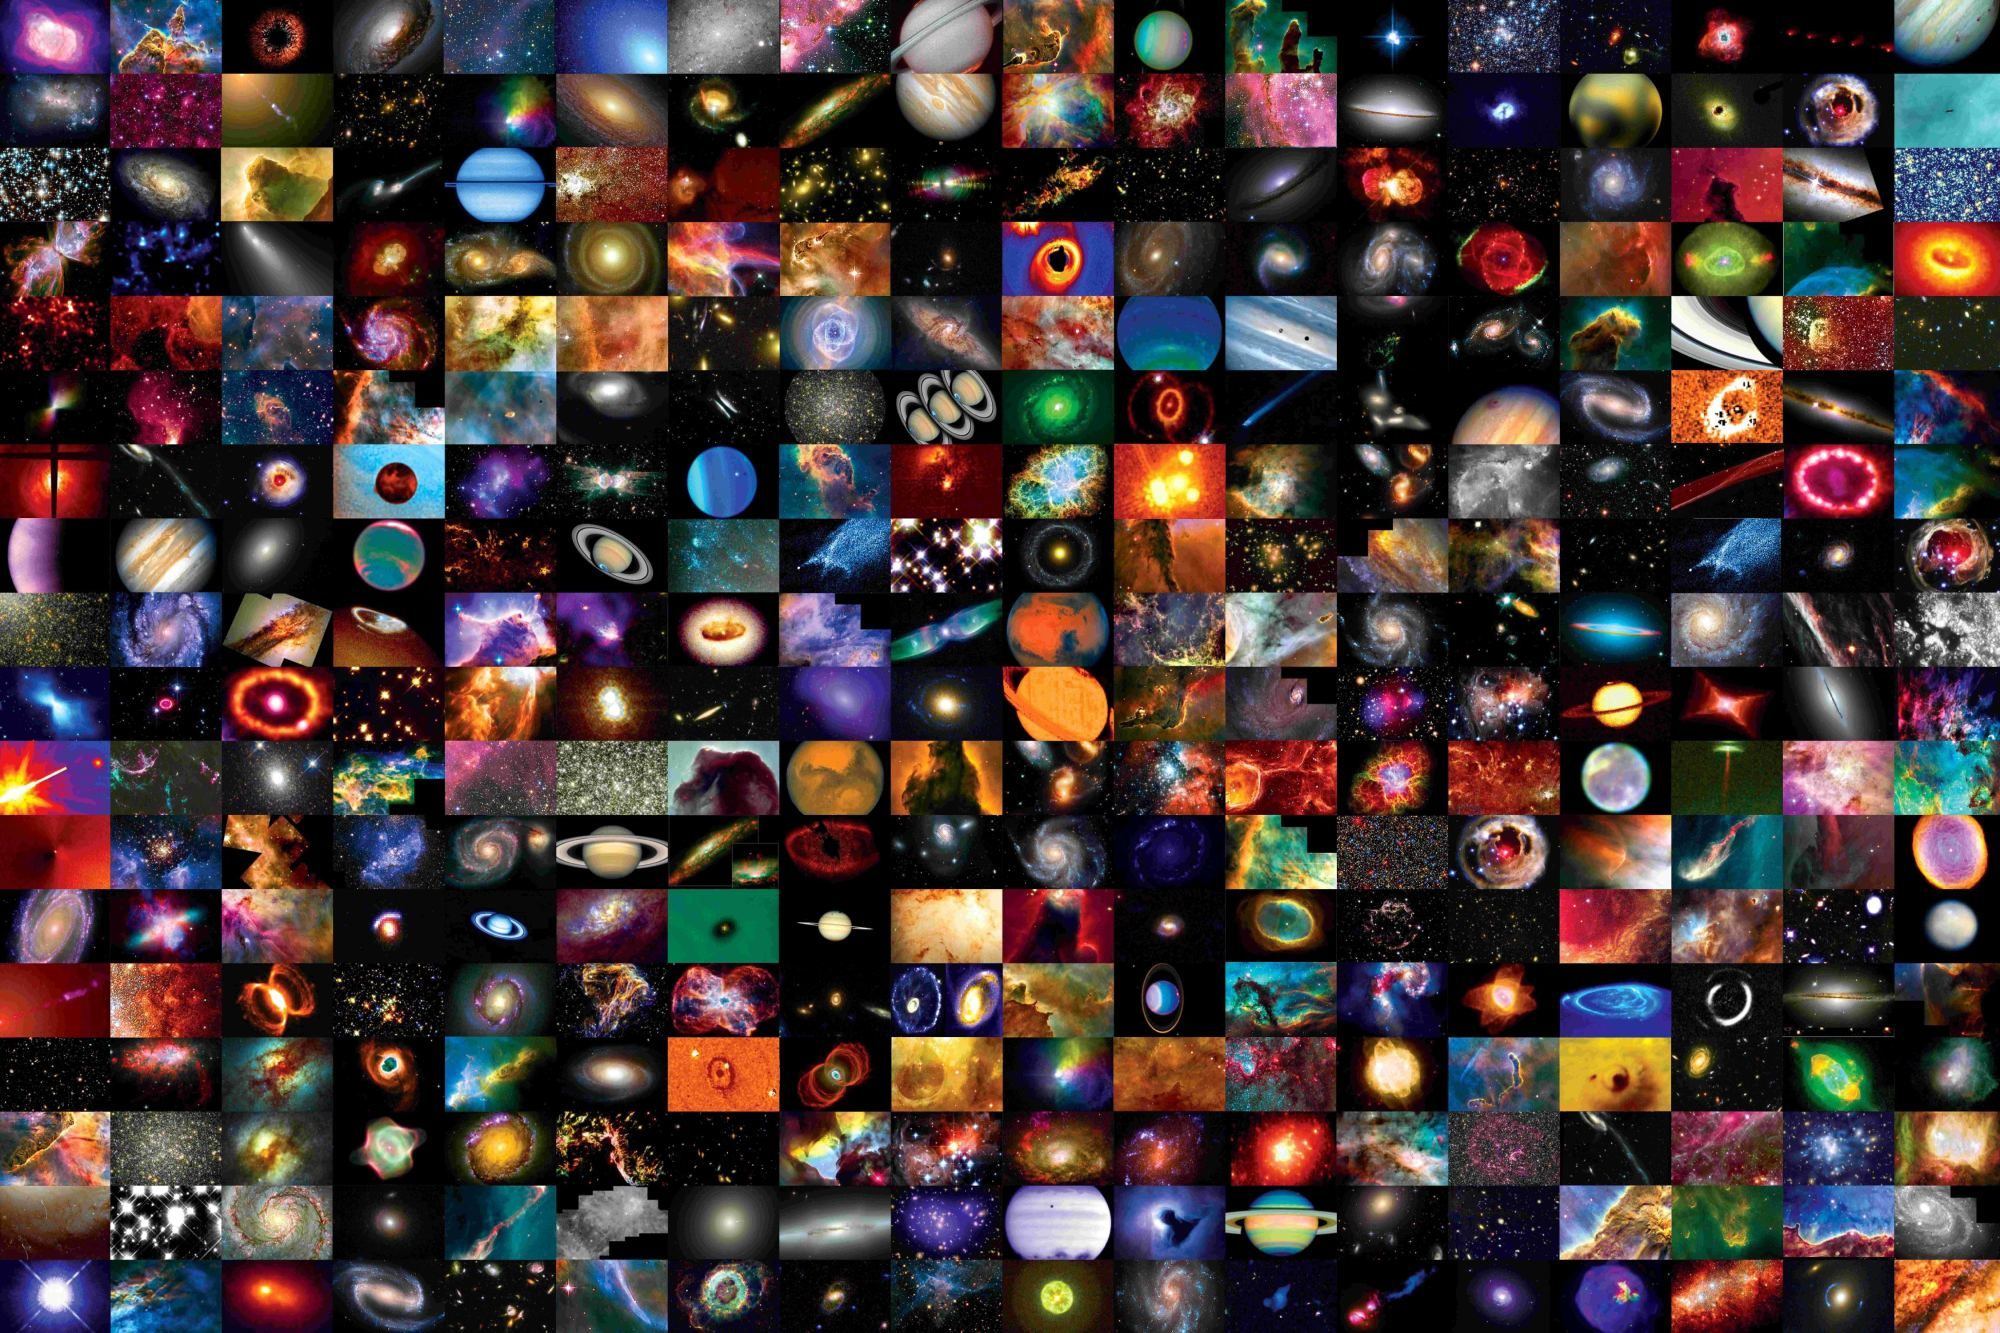 A colorful array of Hubble images. Rows and columns of images include the varied objects Hubble observes.